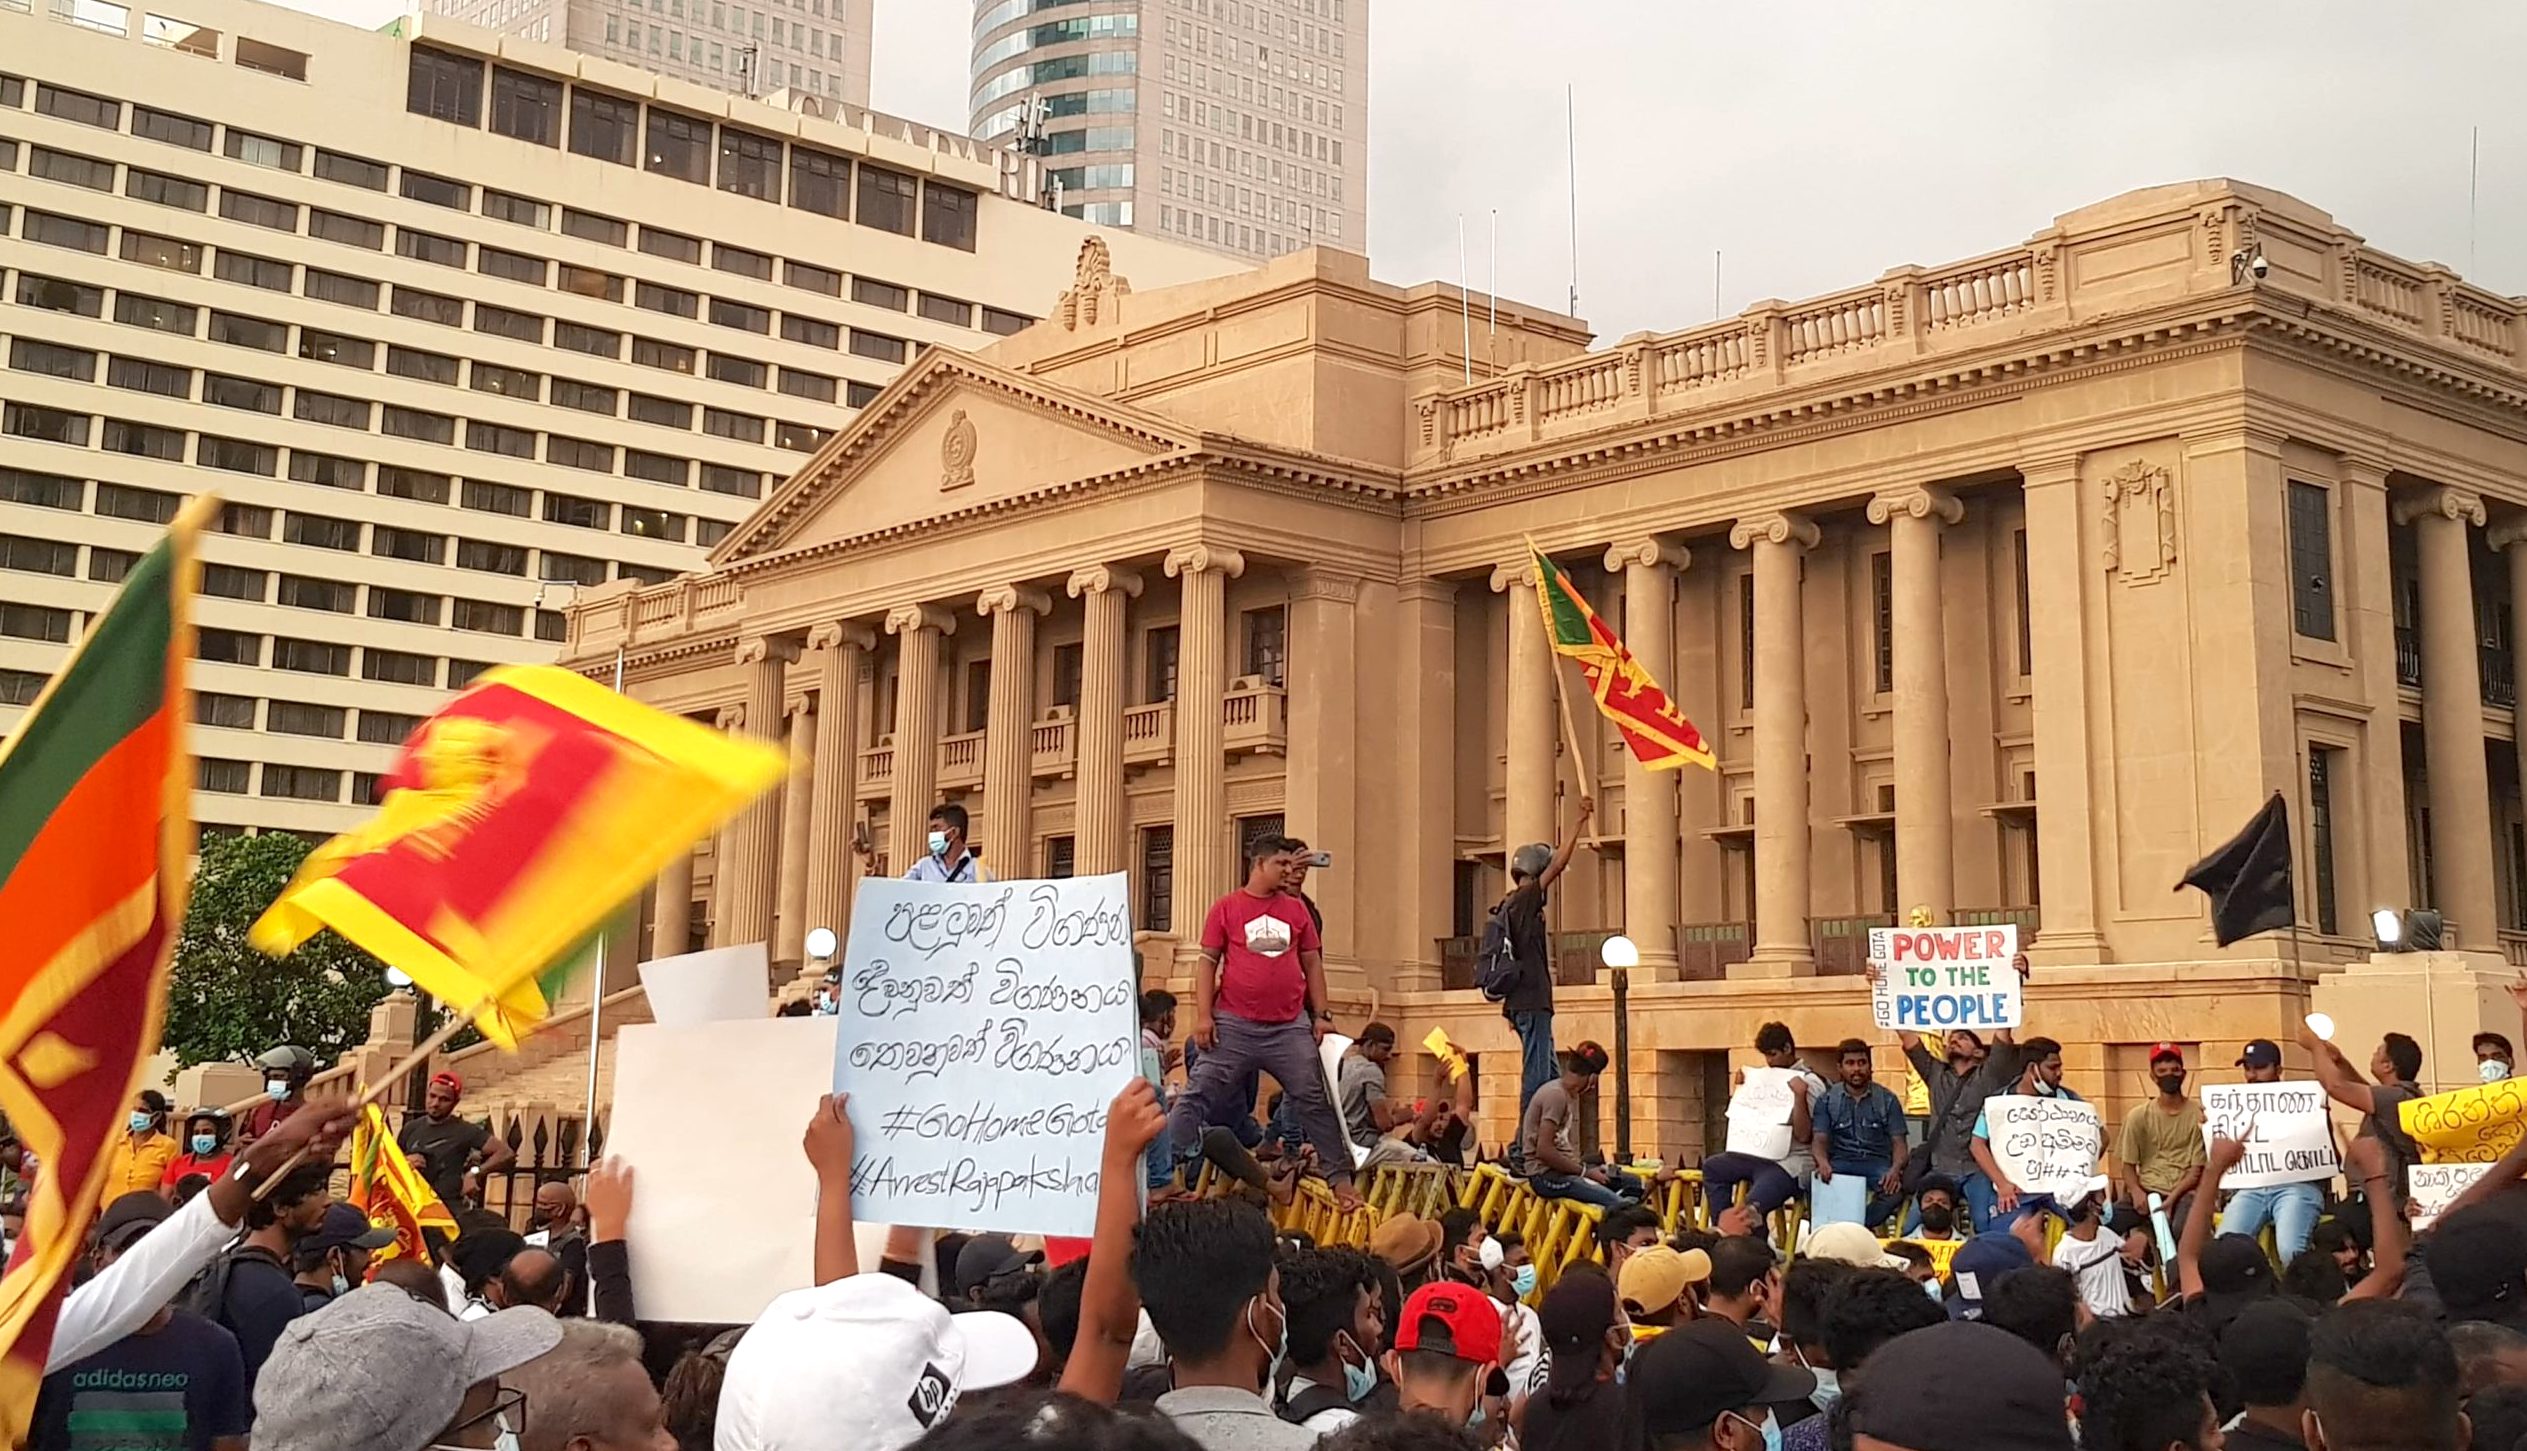 Are ongoing peaceful, creative and spontaneous protests Sri Lanka's 'Arab Spring moment'? · Global Voices